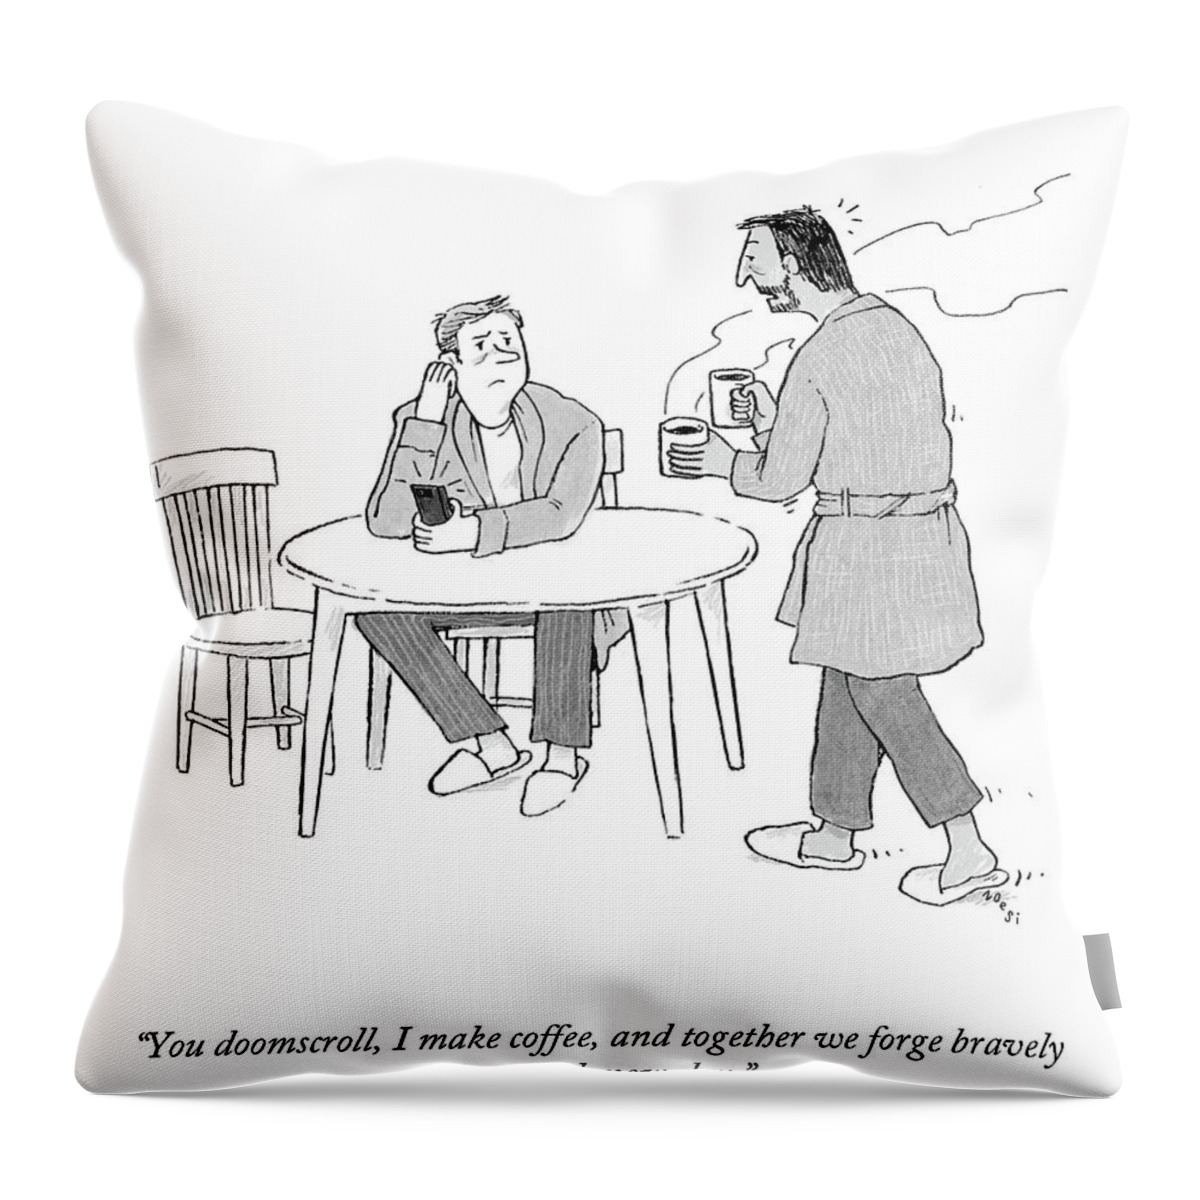 Together We Forge Bravely Into Each New Day Throw Pillow